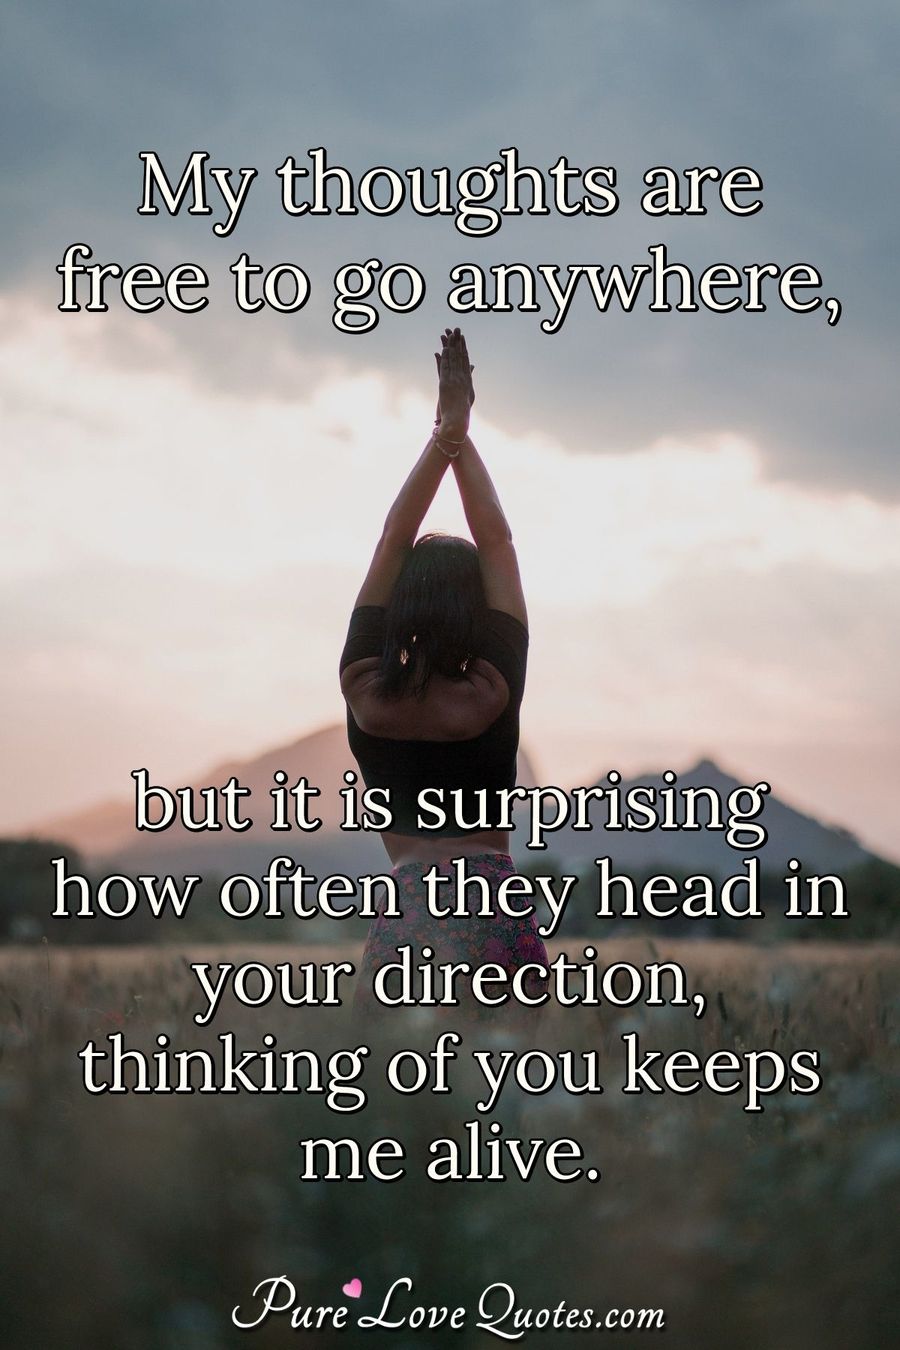 My thoughts are free to go anywhere, but it's surprising how often they head in your direction. - Anonymous